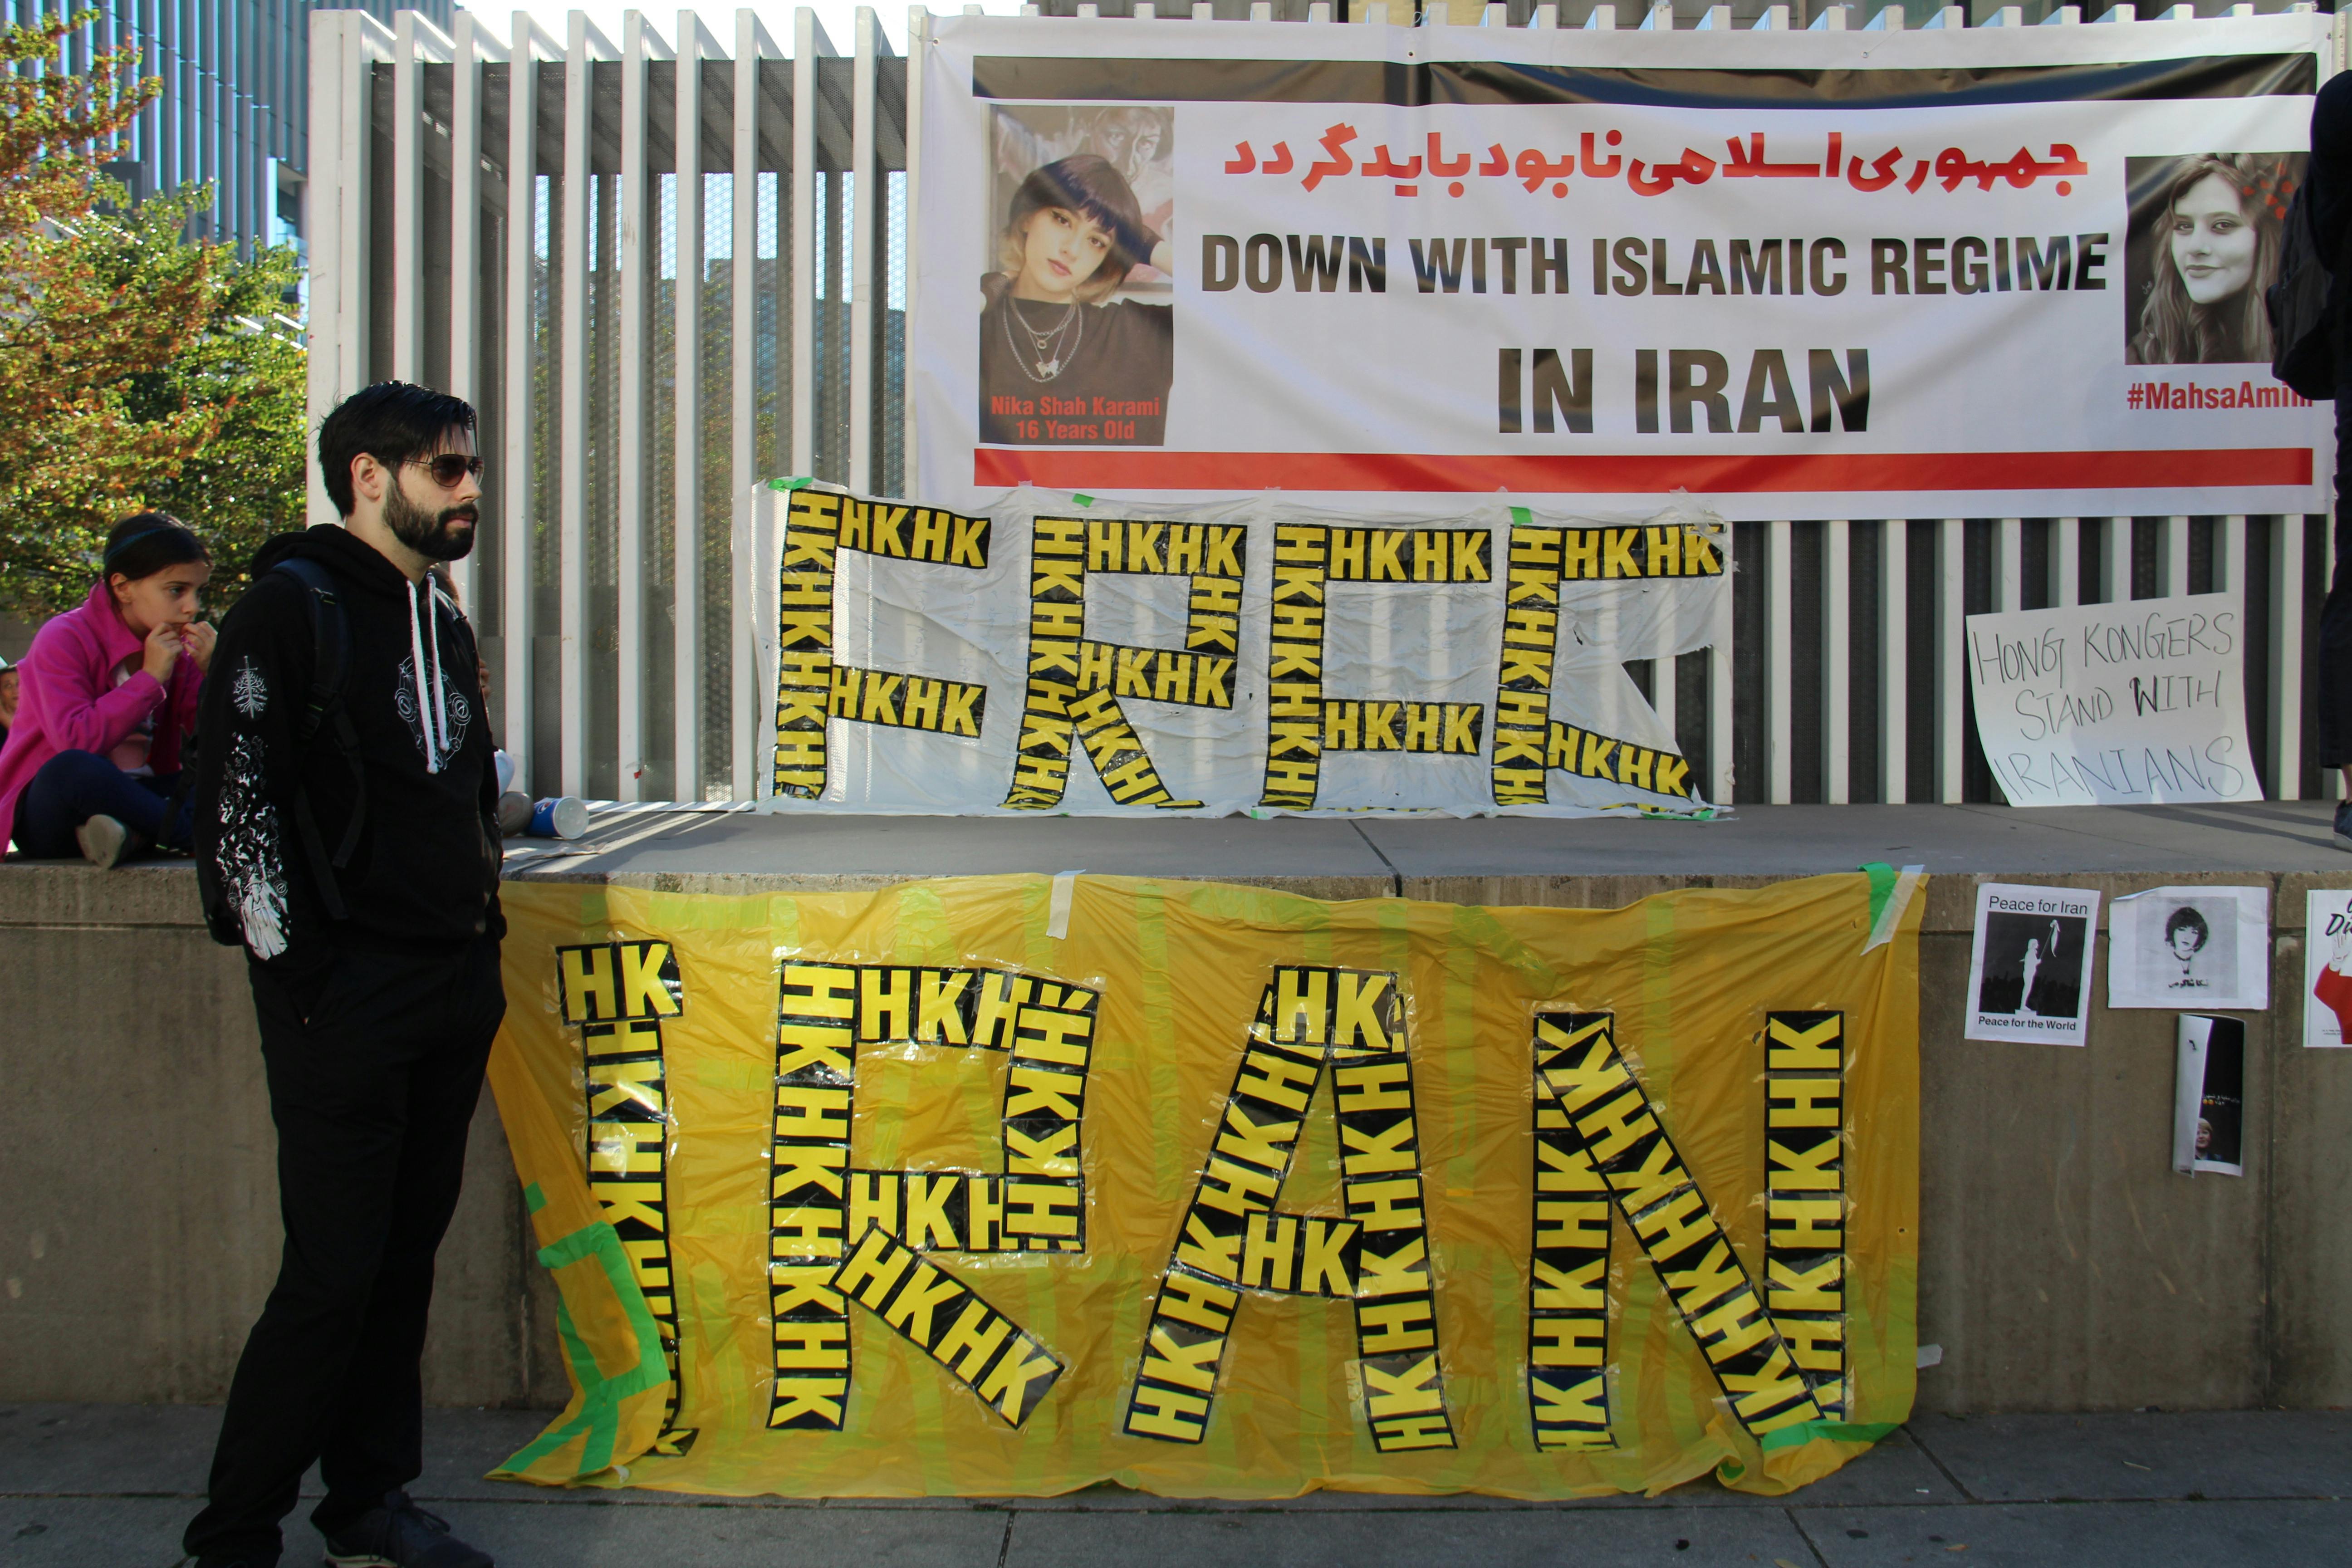 a protester standing beside banners at a demonstration